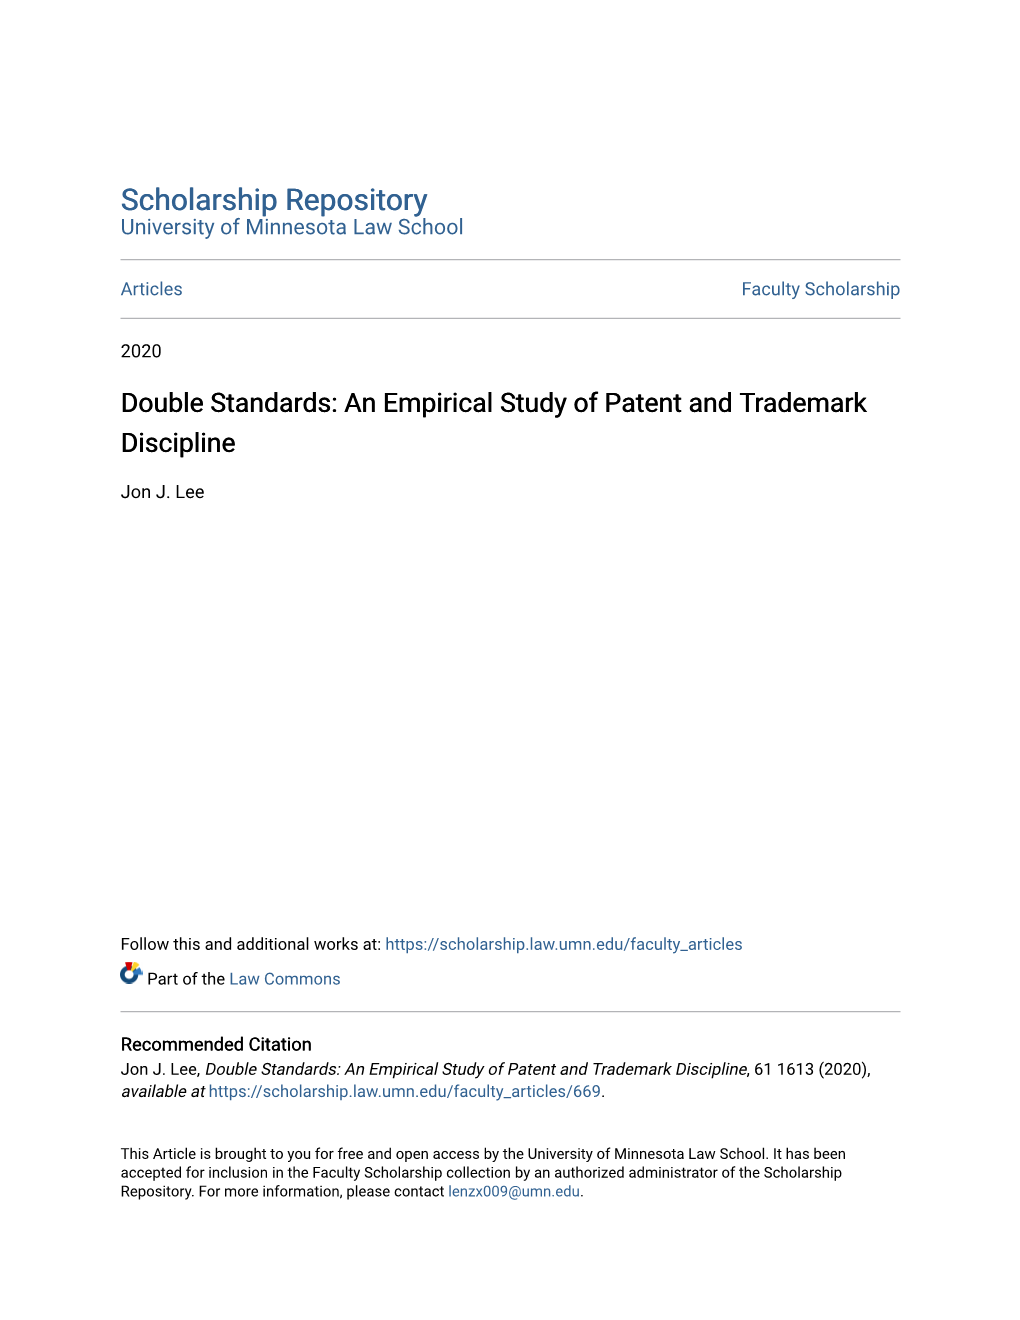 Double Standards: an Empirical Study of Patent and Trademark Discipline